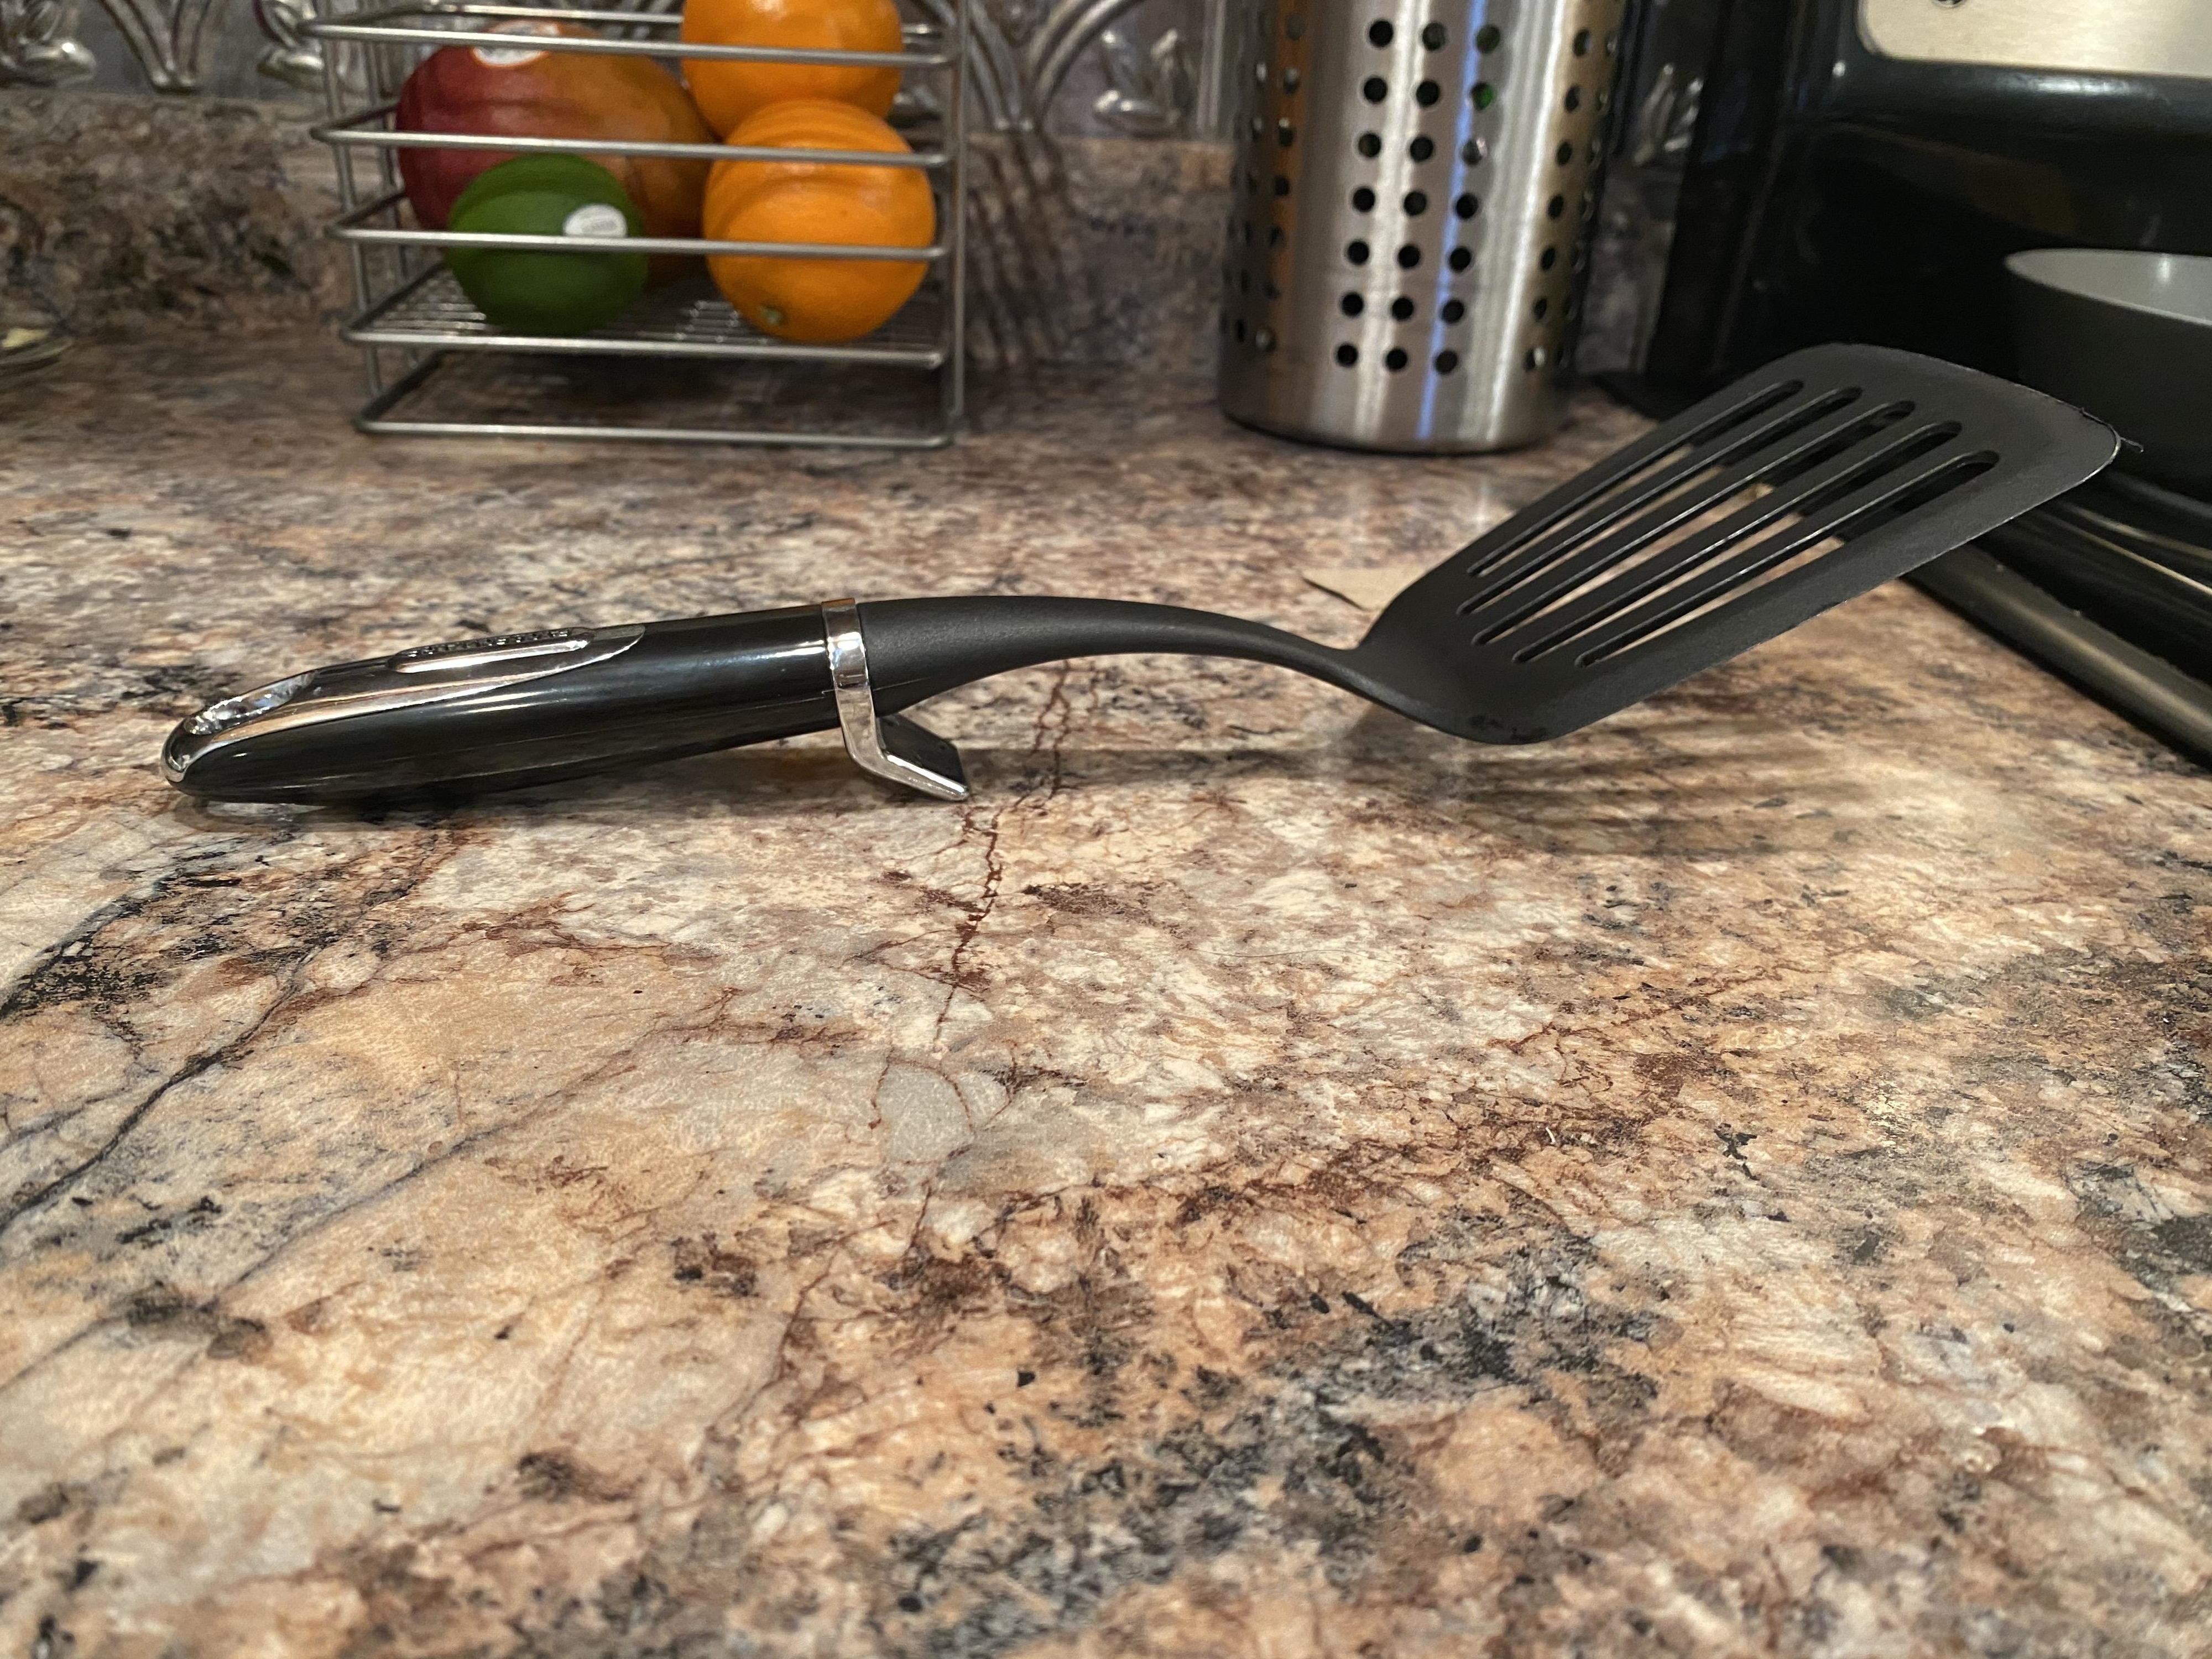 spatula lifted off the counter